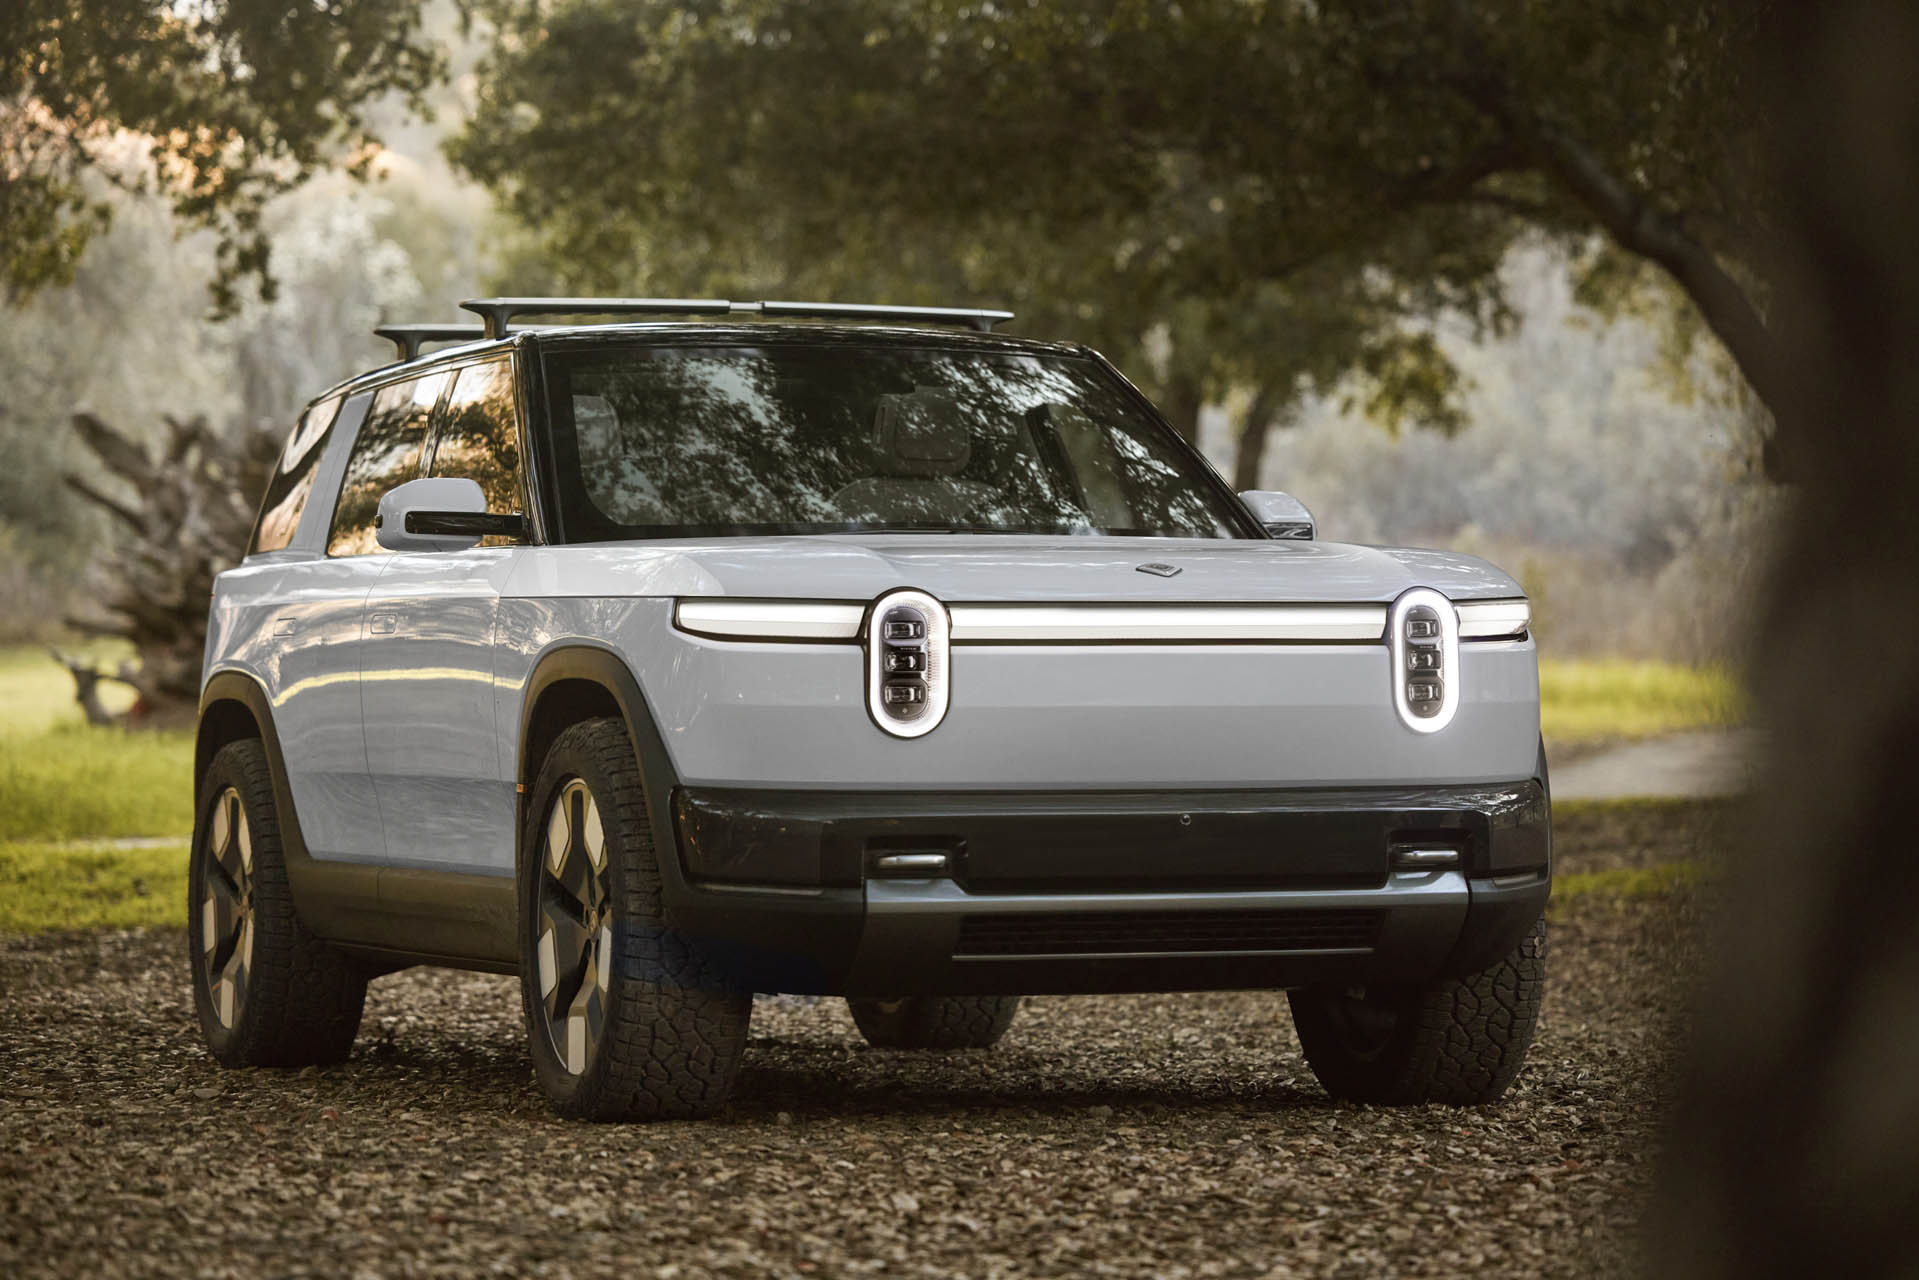 Rivian teases 5 vehicles in announcing tie-up with VW Group Auto Recent